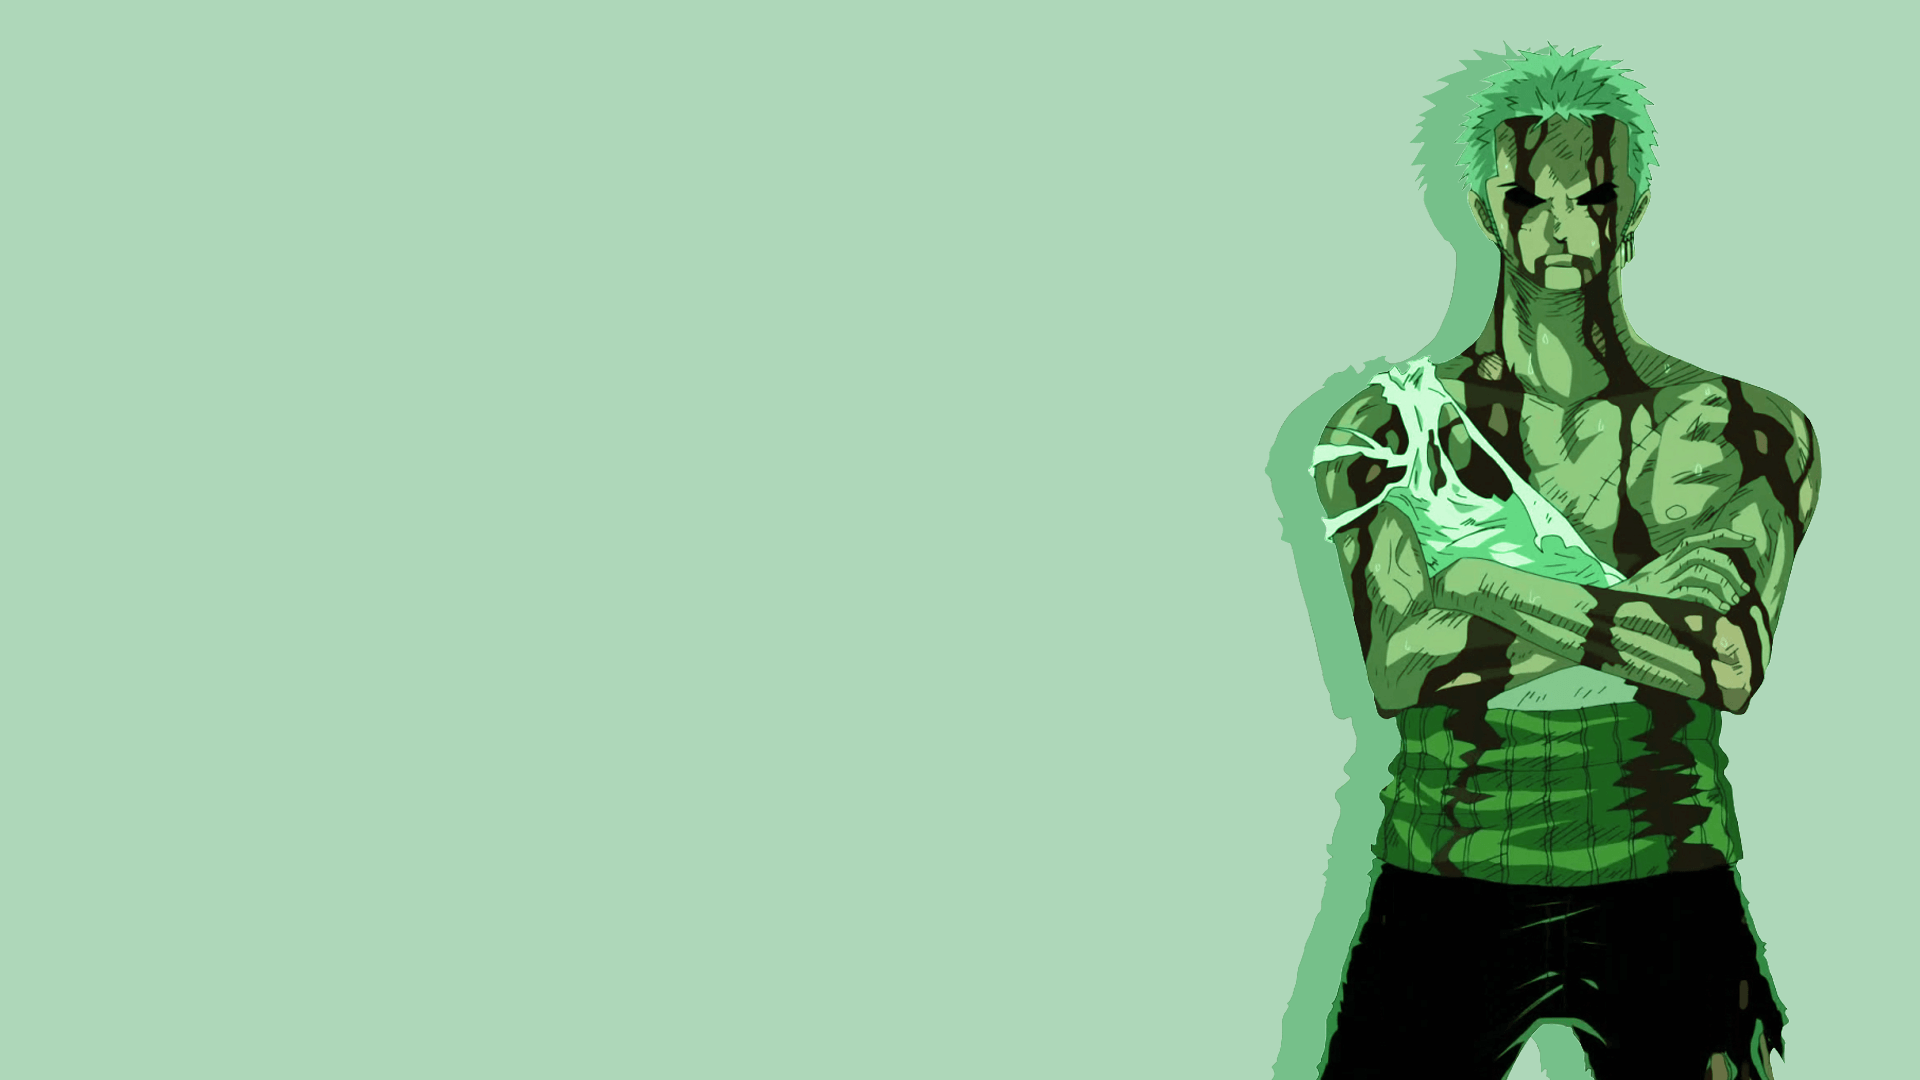 Zoro Hd Wallpapers For Mobile